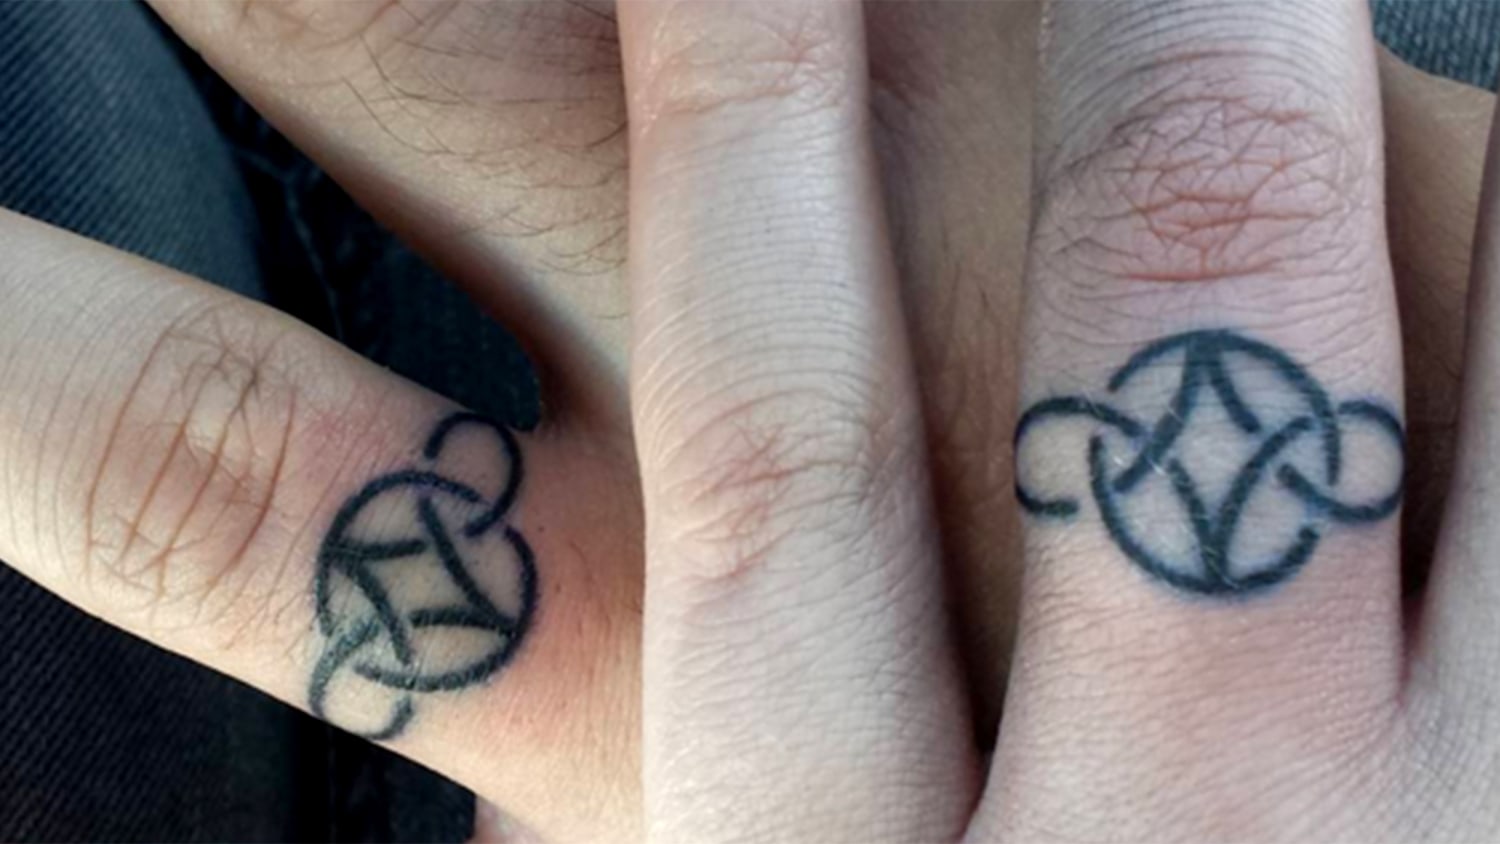 16 Wedding Ring Tattoos We Kind of LOVE - Brit + Co